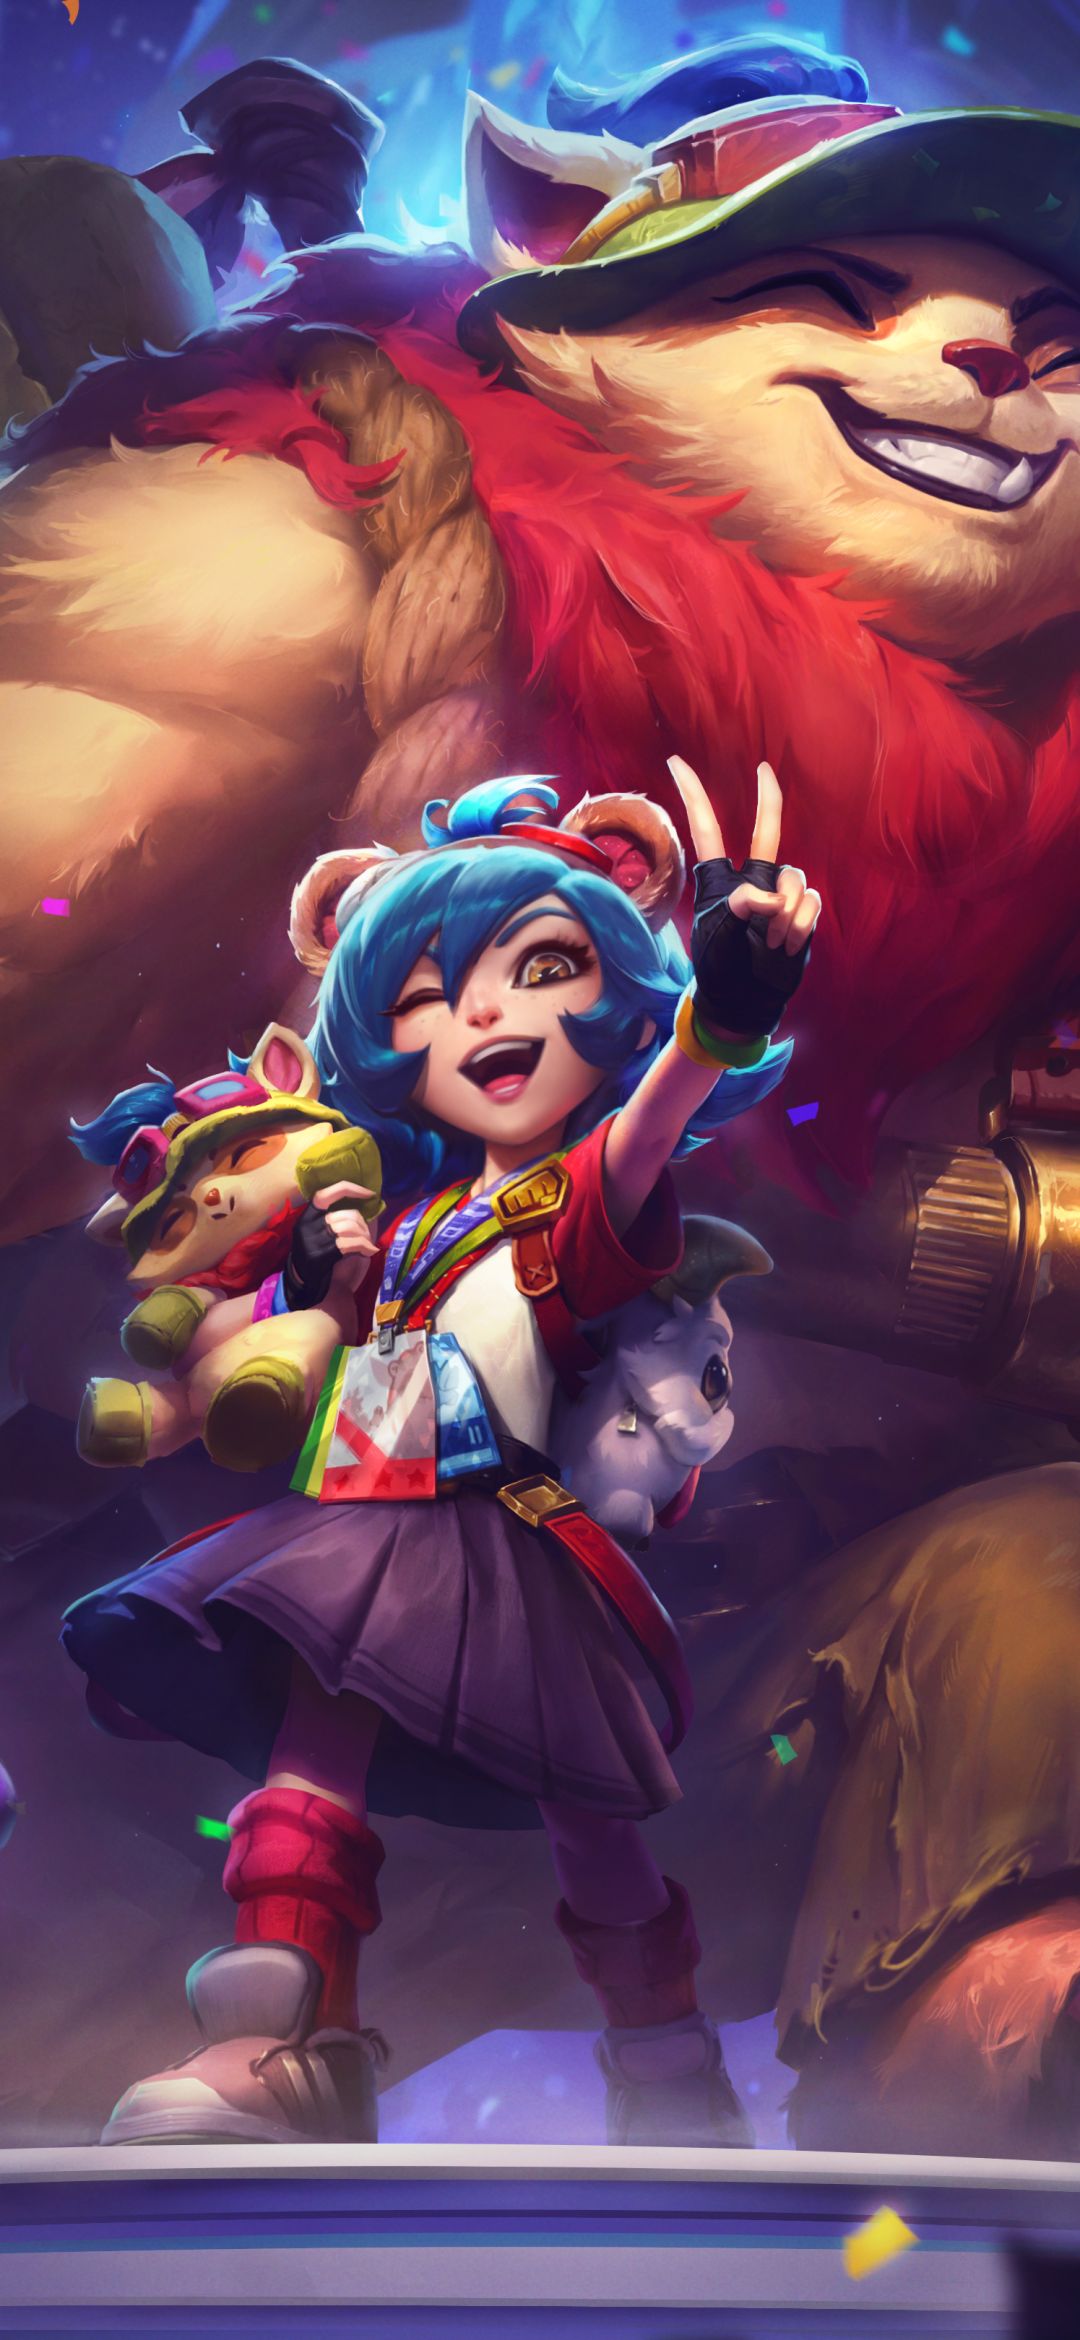 video game, league of legends, teemo (league of legends), annie (league of legends), poro (league of legends)